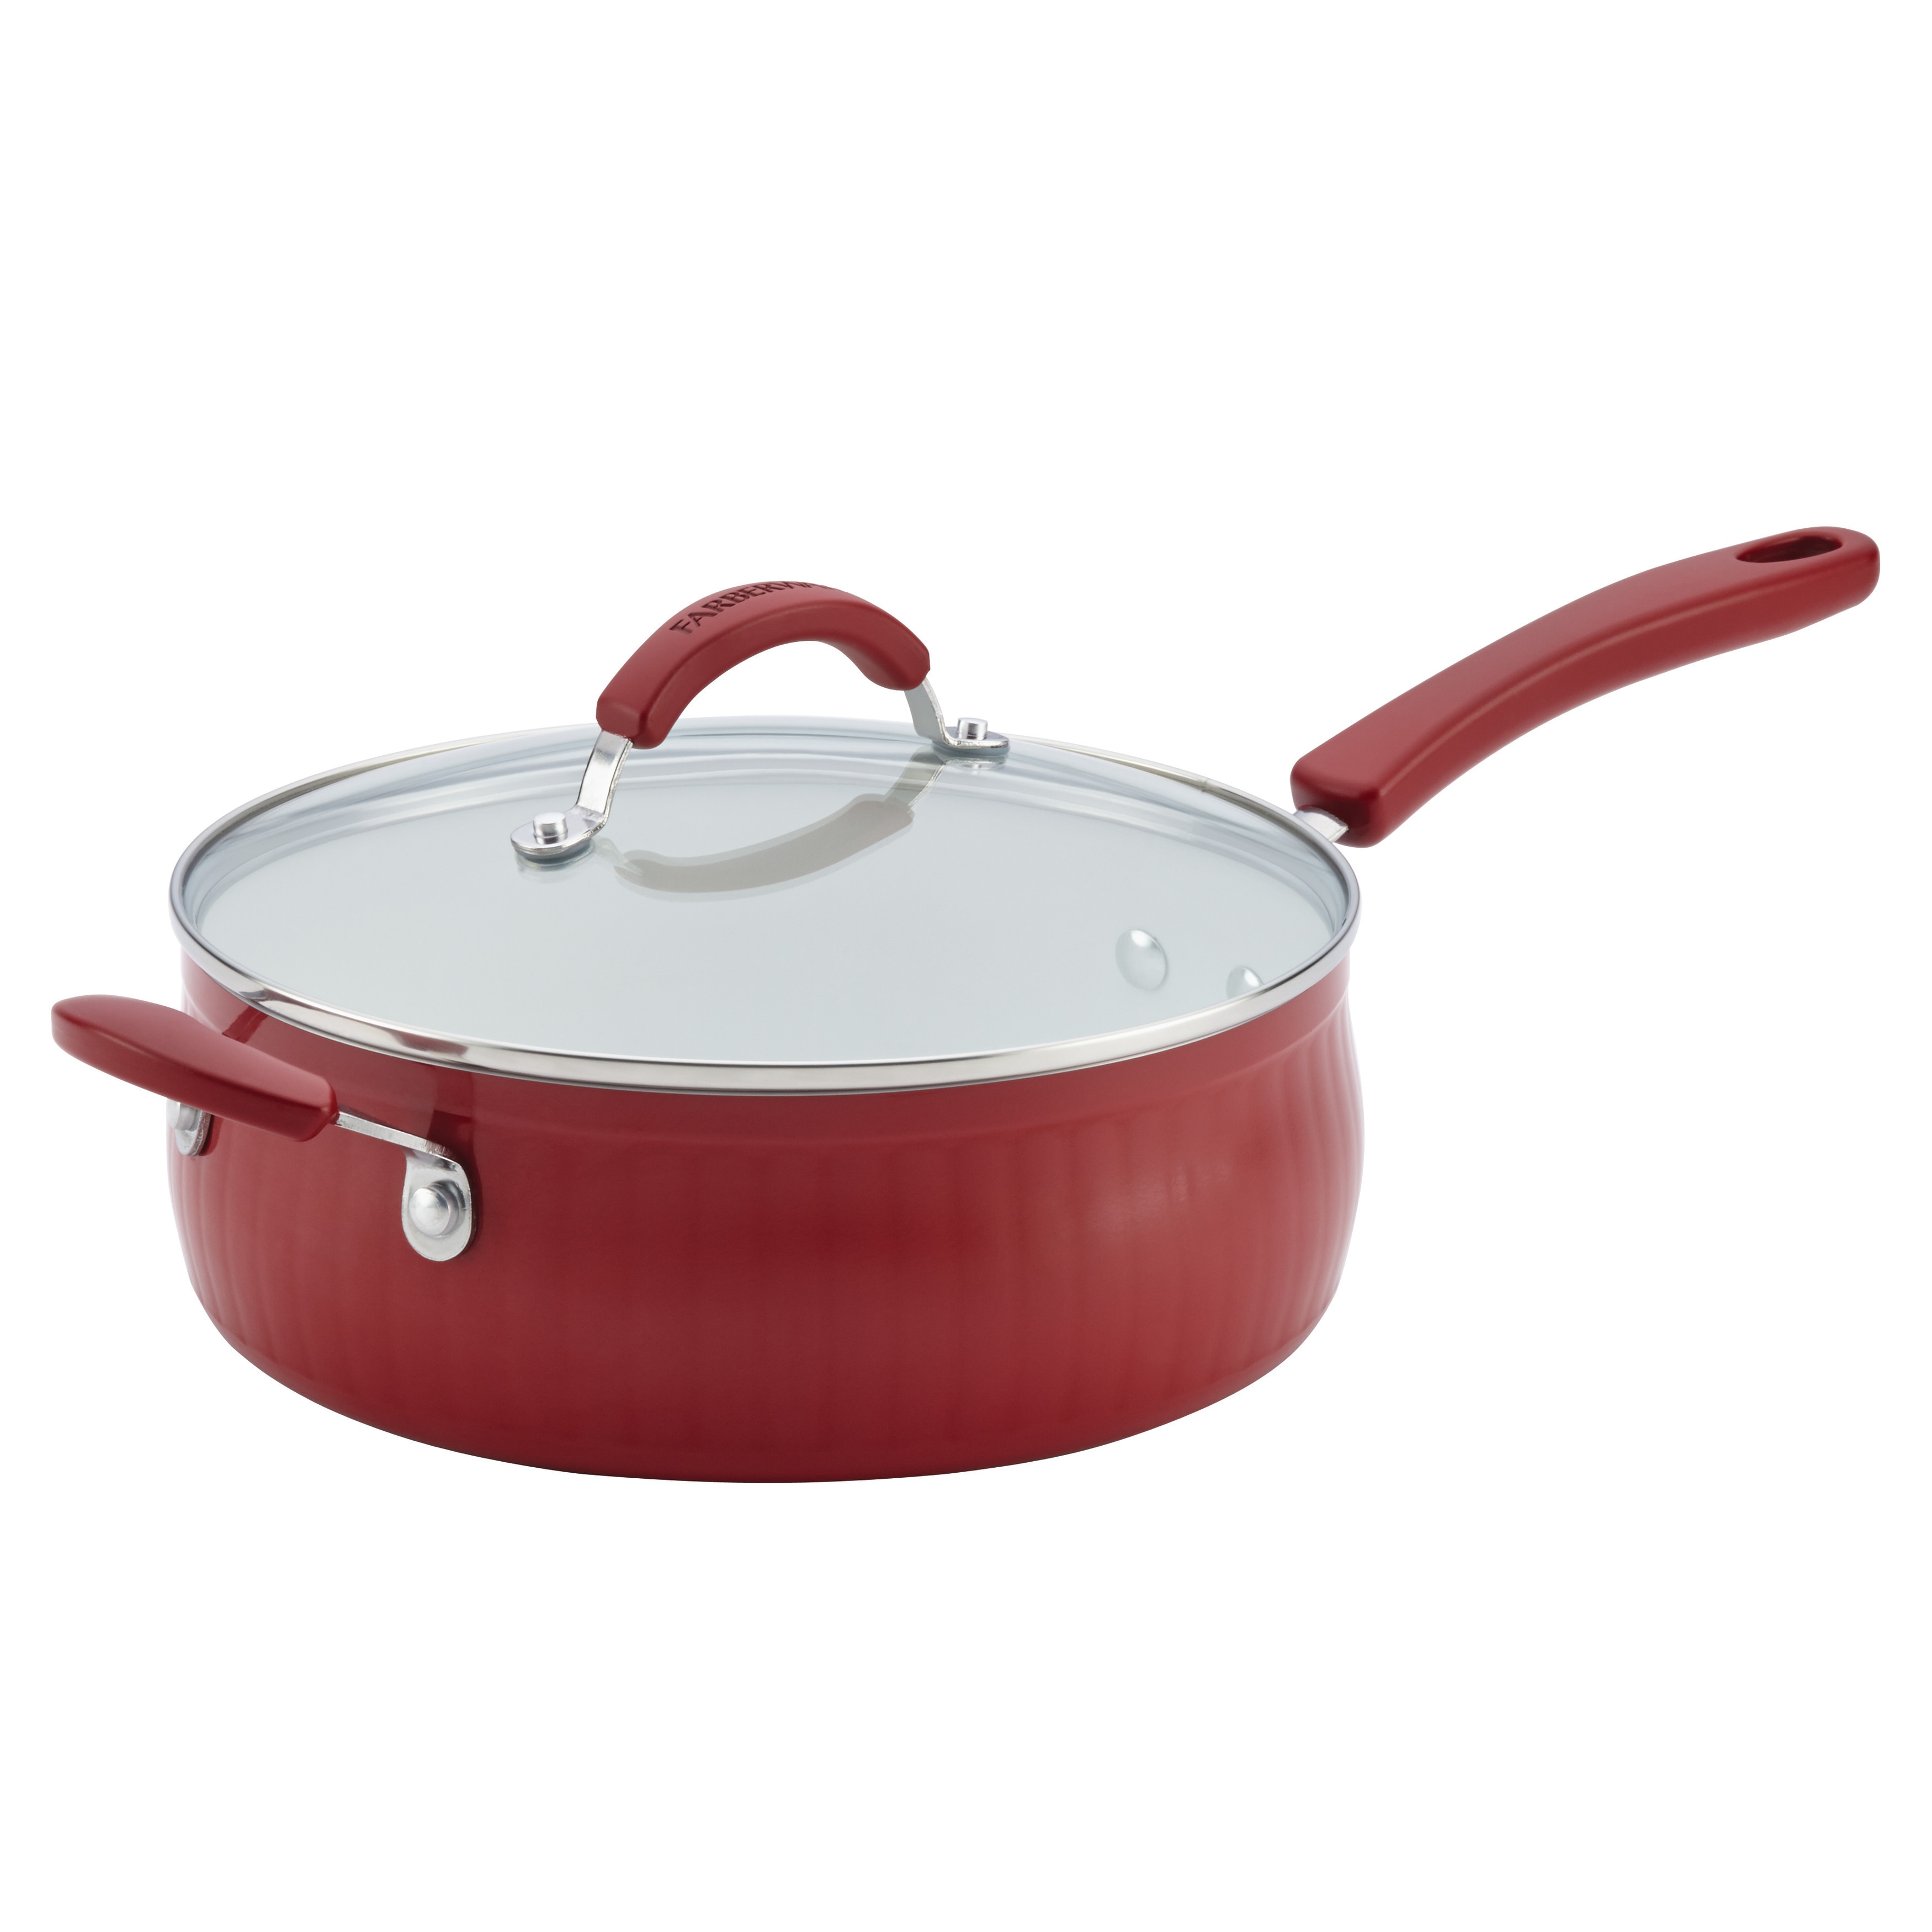  Cuisinart 622-20 Chef's Classic 8-Inch Open Skillet  Nonstick-Hard-Anodized & 619-14 Chef's Classic 1-Quart  Nonstick-Hard-Anodized, Saucepan w/Cover: Home & Kitchen